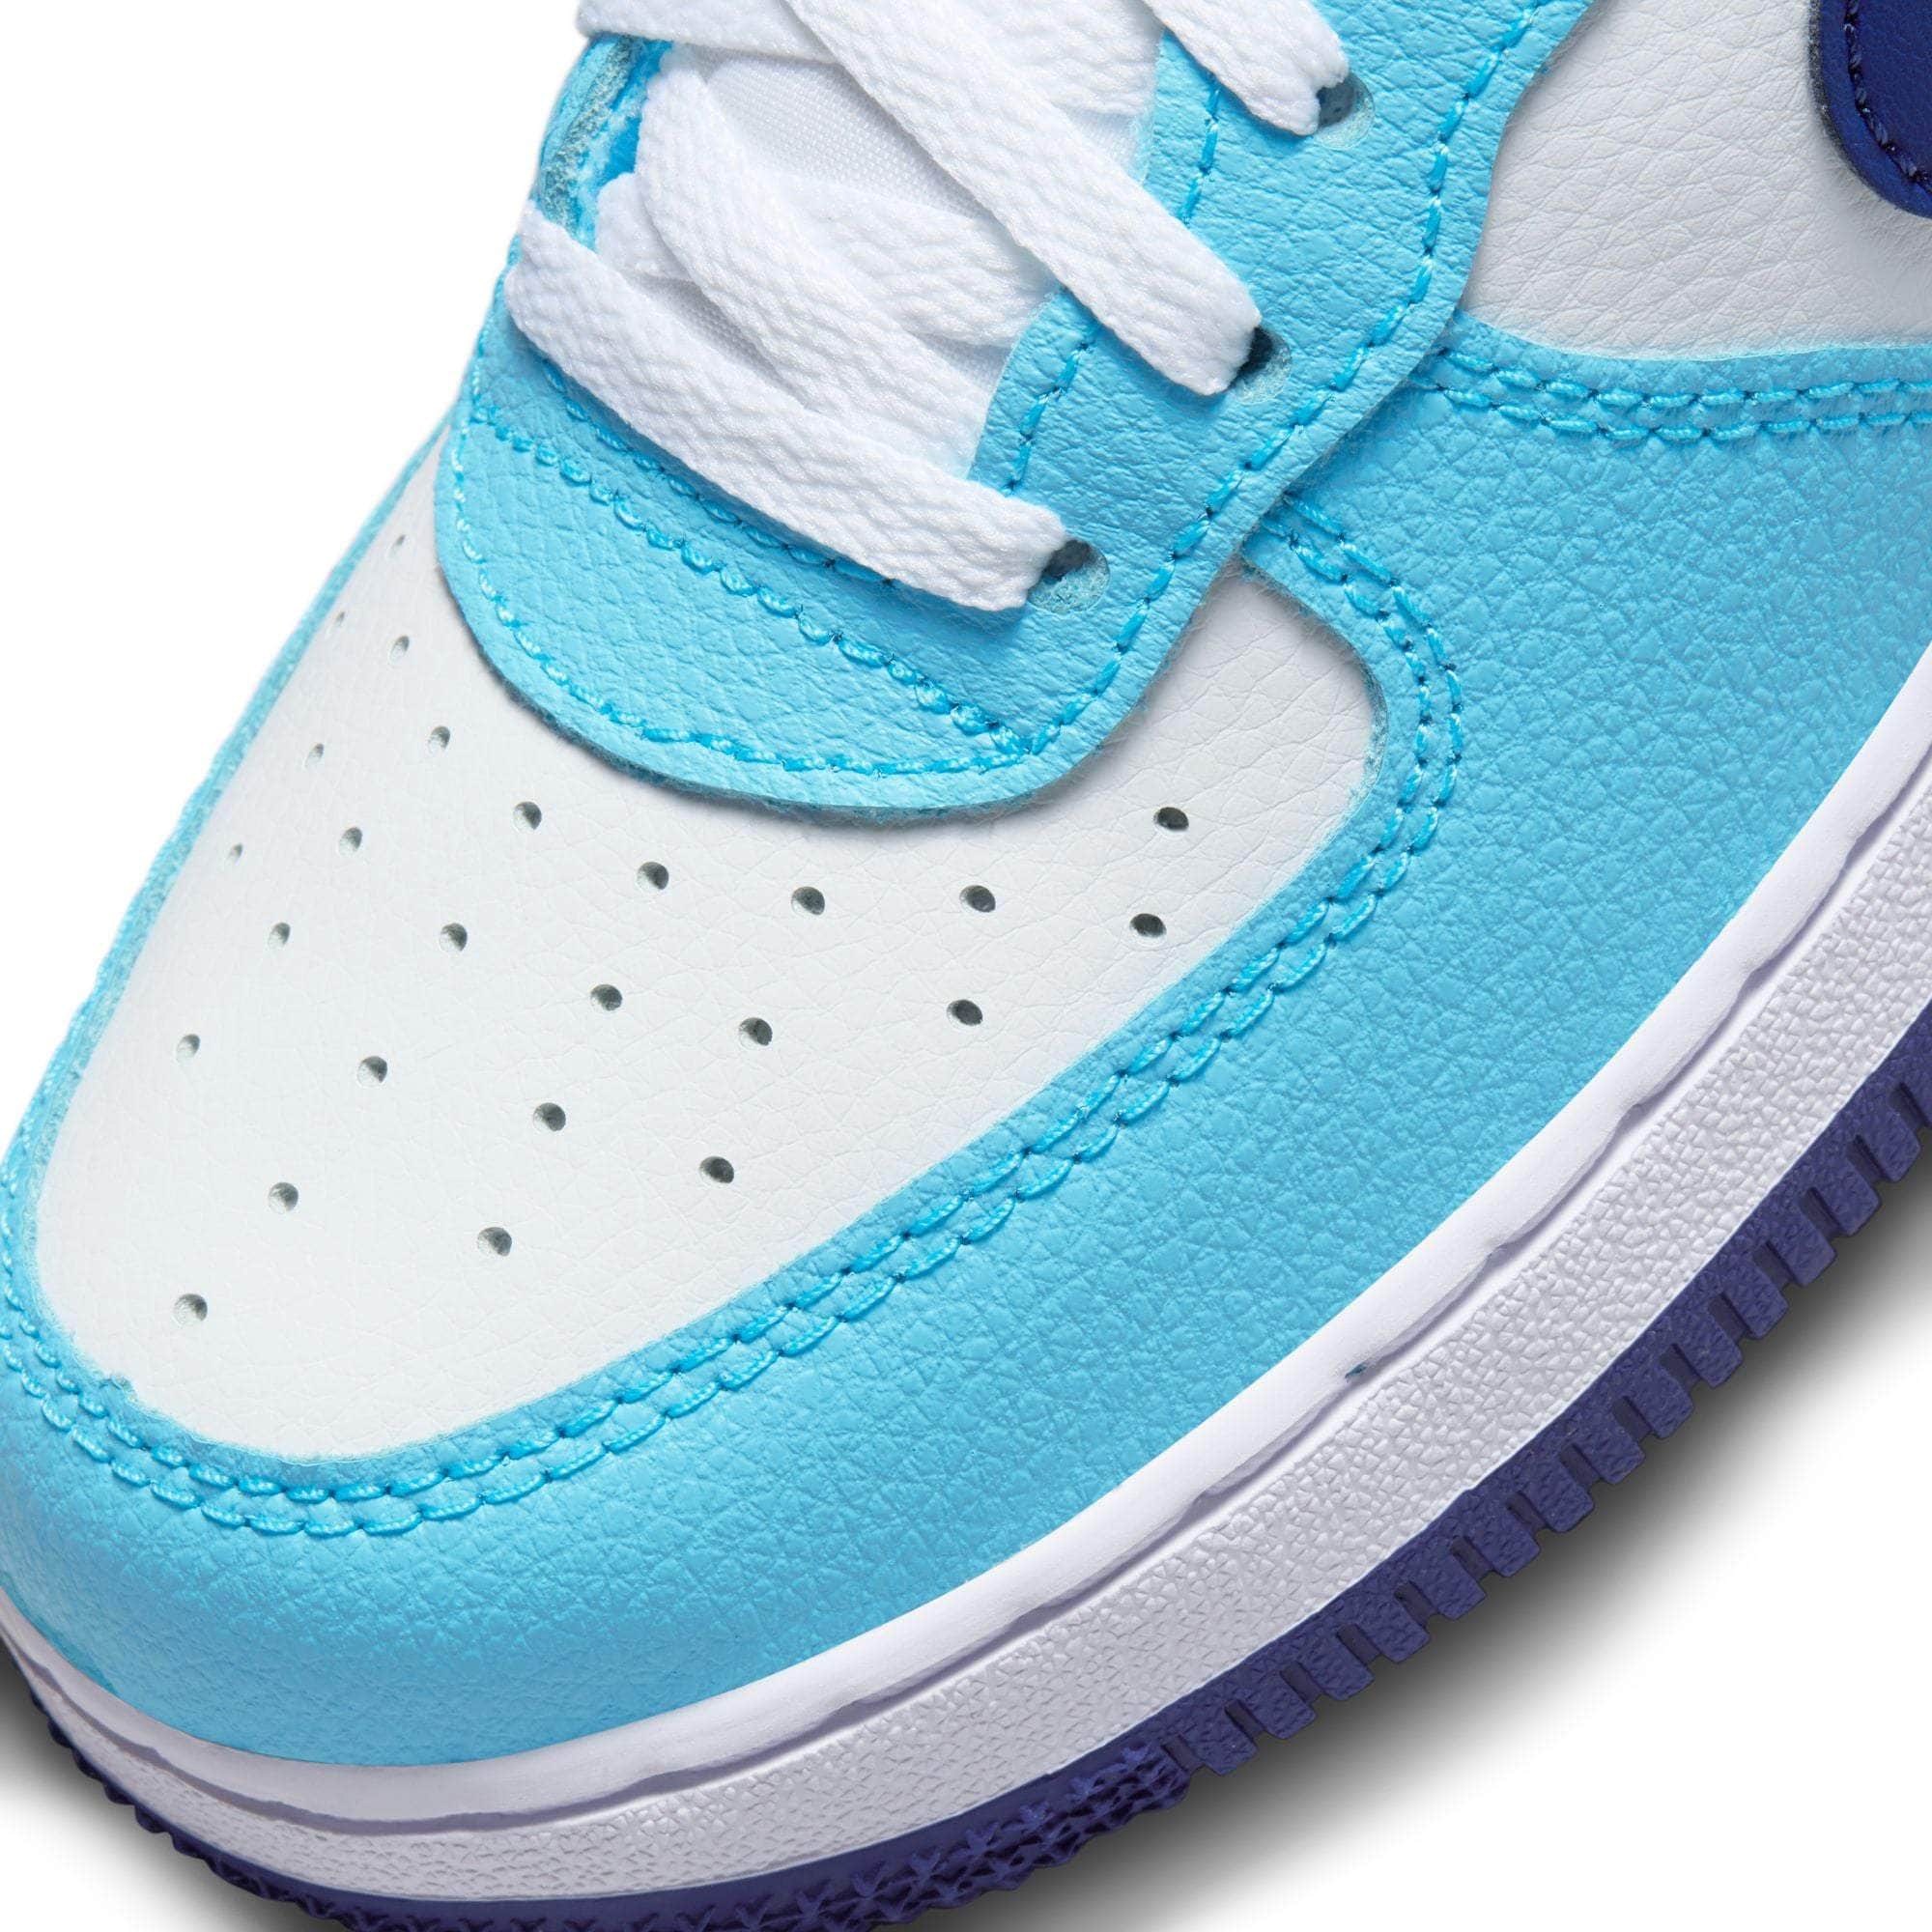 Nike Air Force 1 Low 'Blue Gale